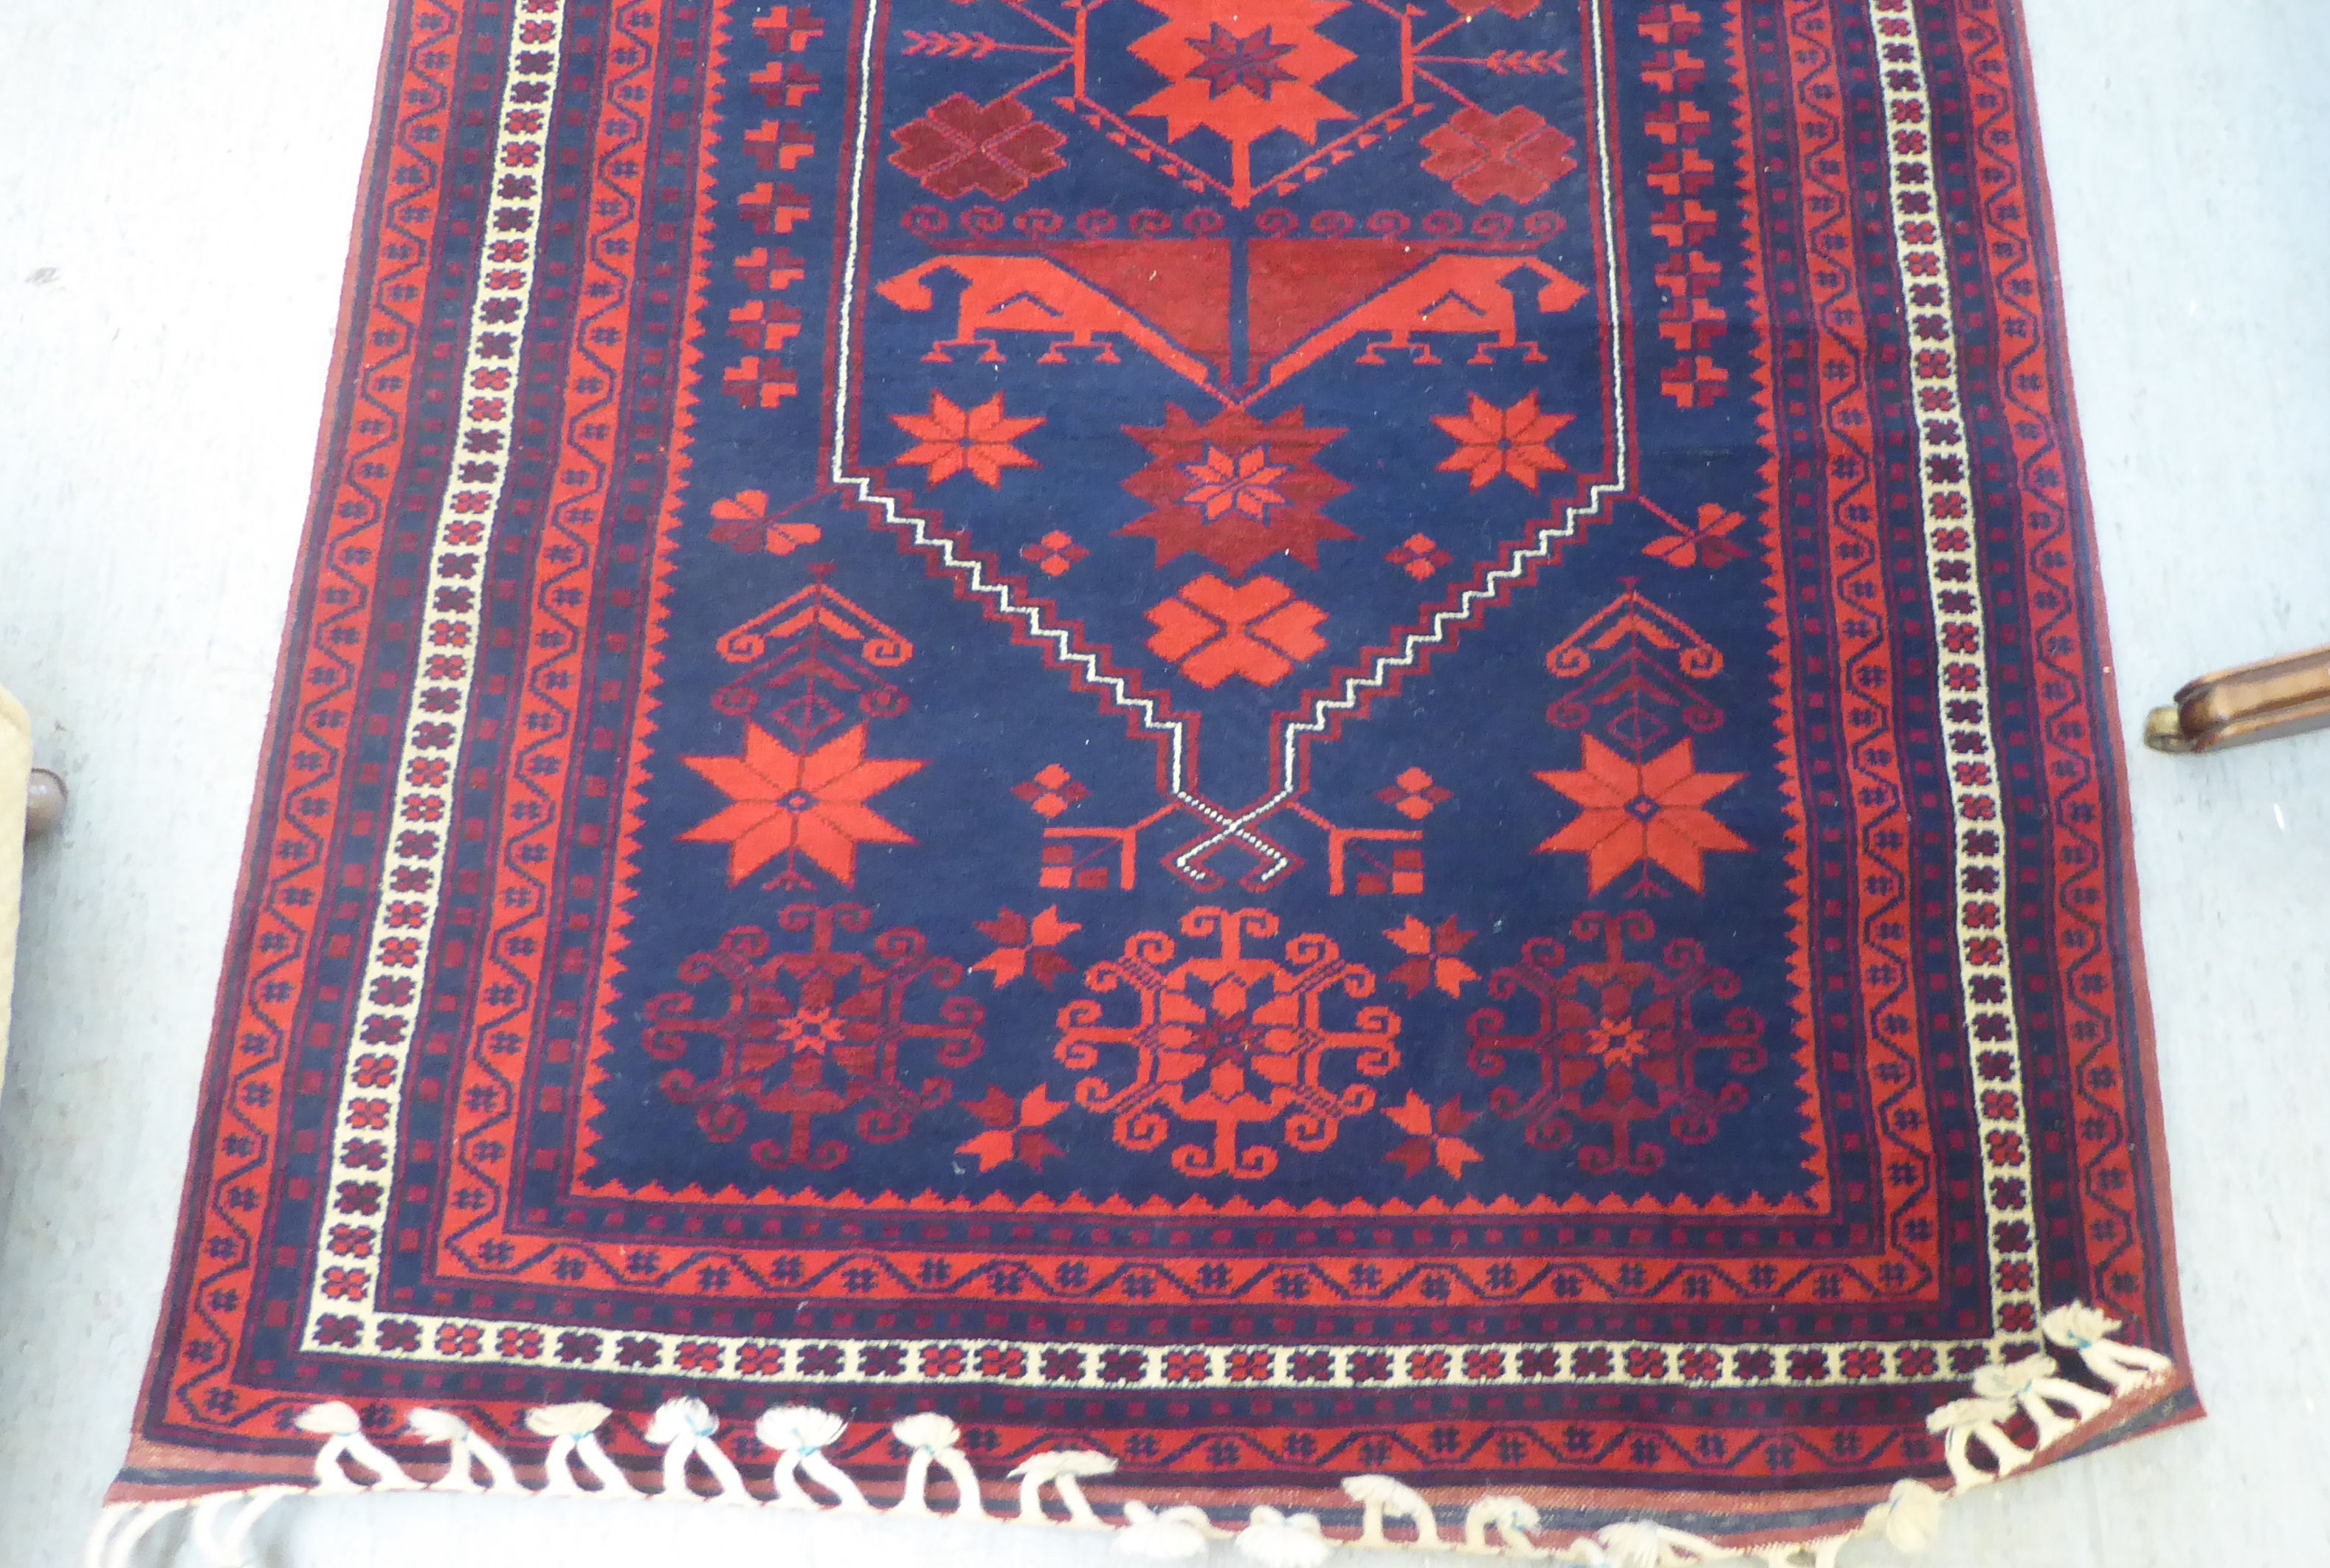 A Turkish rug, decorated with geometric patterns, on a red and blue ground  48" x 78" - Image 2 of 4